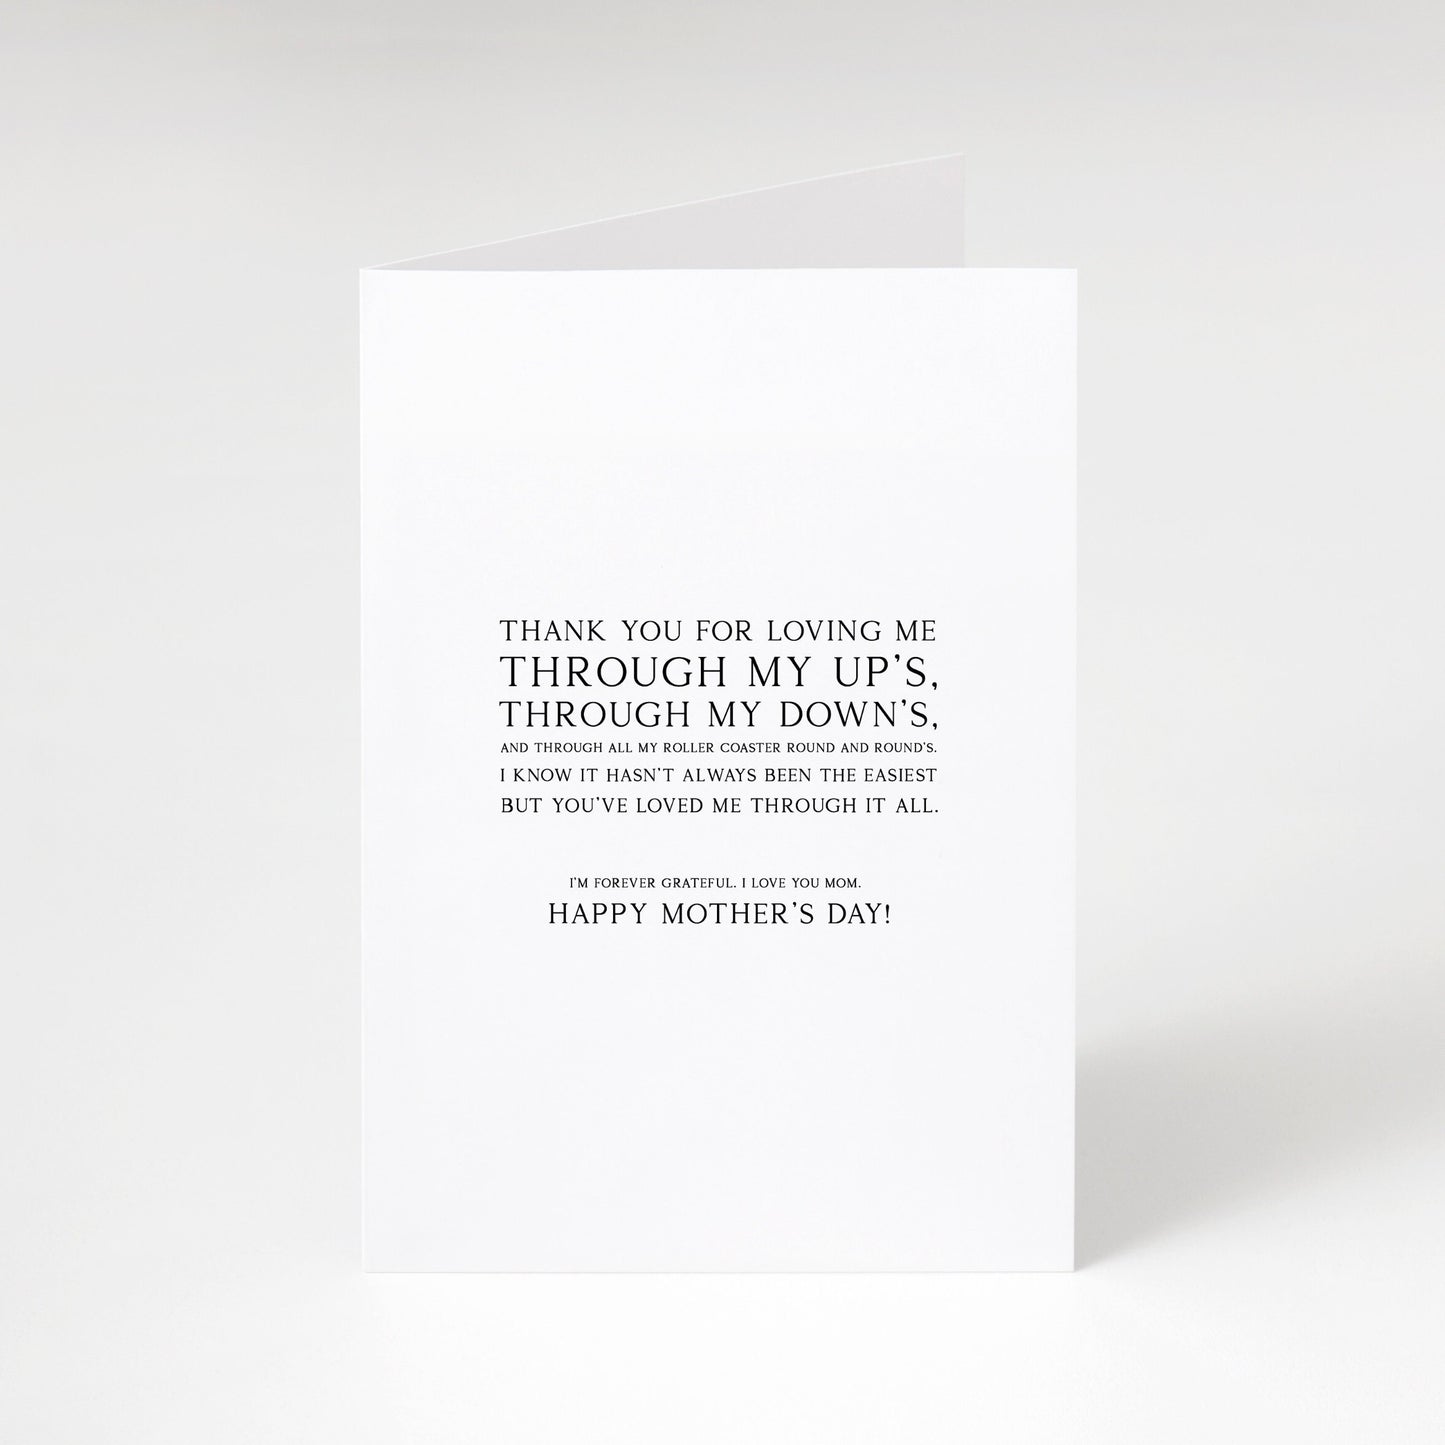 Mom thank you for loving me through my ups and downs,Happy Mother’s Day card,To Mom,Mother’s Day card,Card for Mom,Card for Mother,From kid